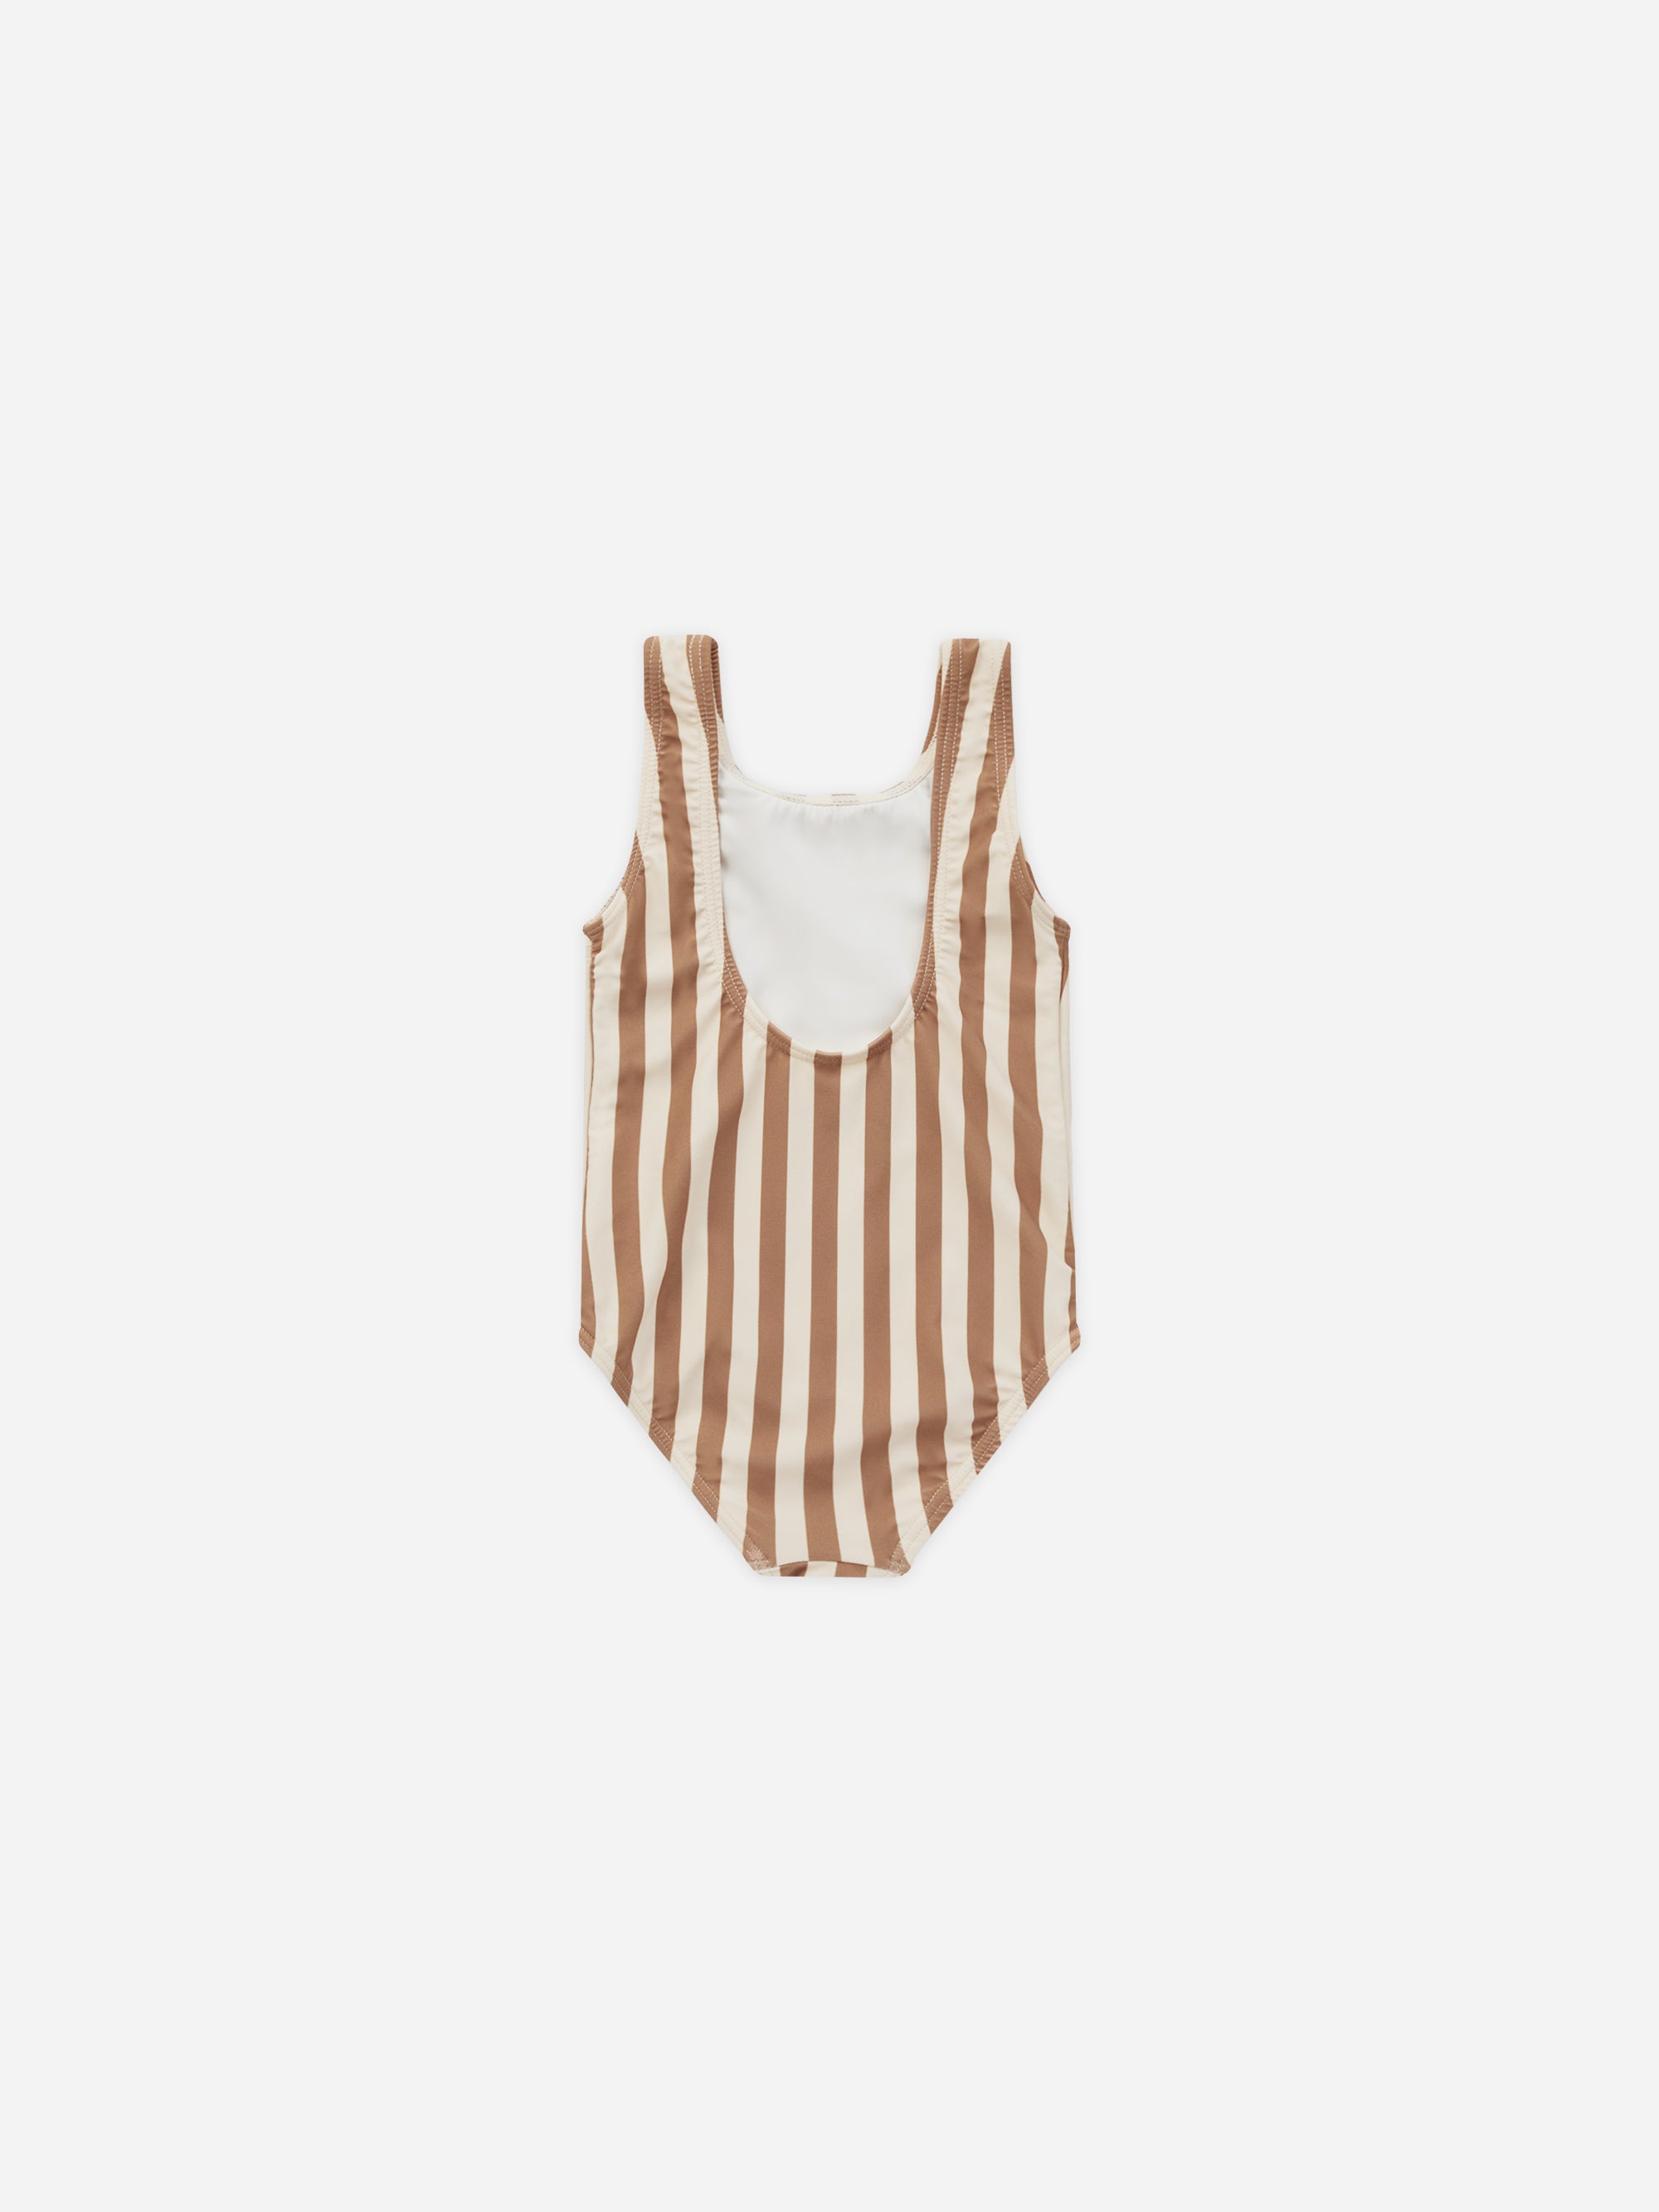 Moxie One-Piece || Clay Stripe - Rylee + Cru | Kids Clothes | Trendy Baby Clothes | Modern Infant Outfits |